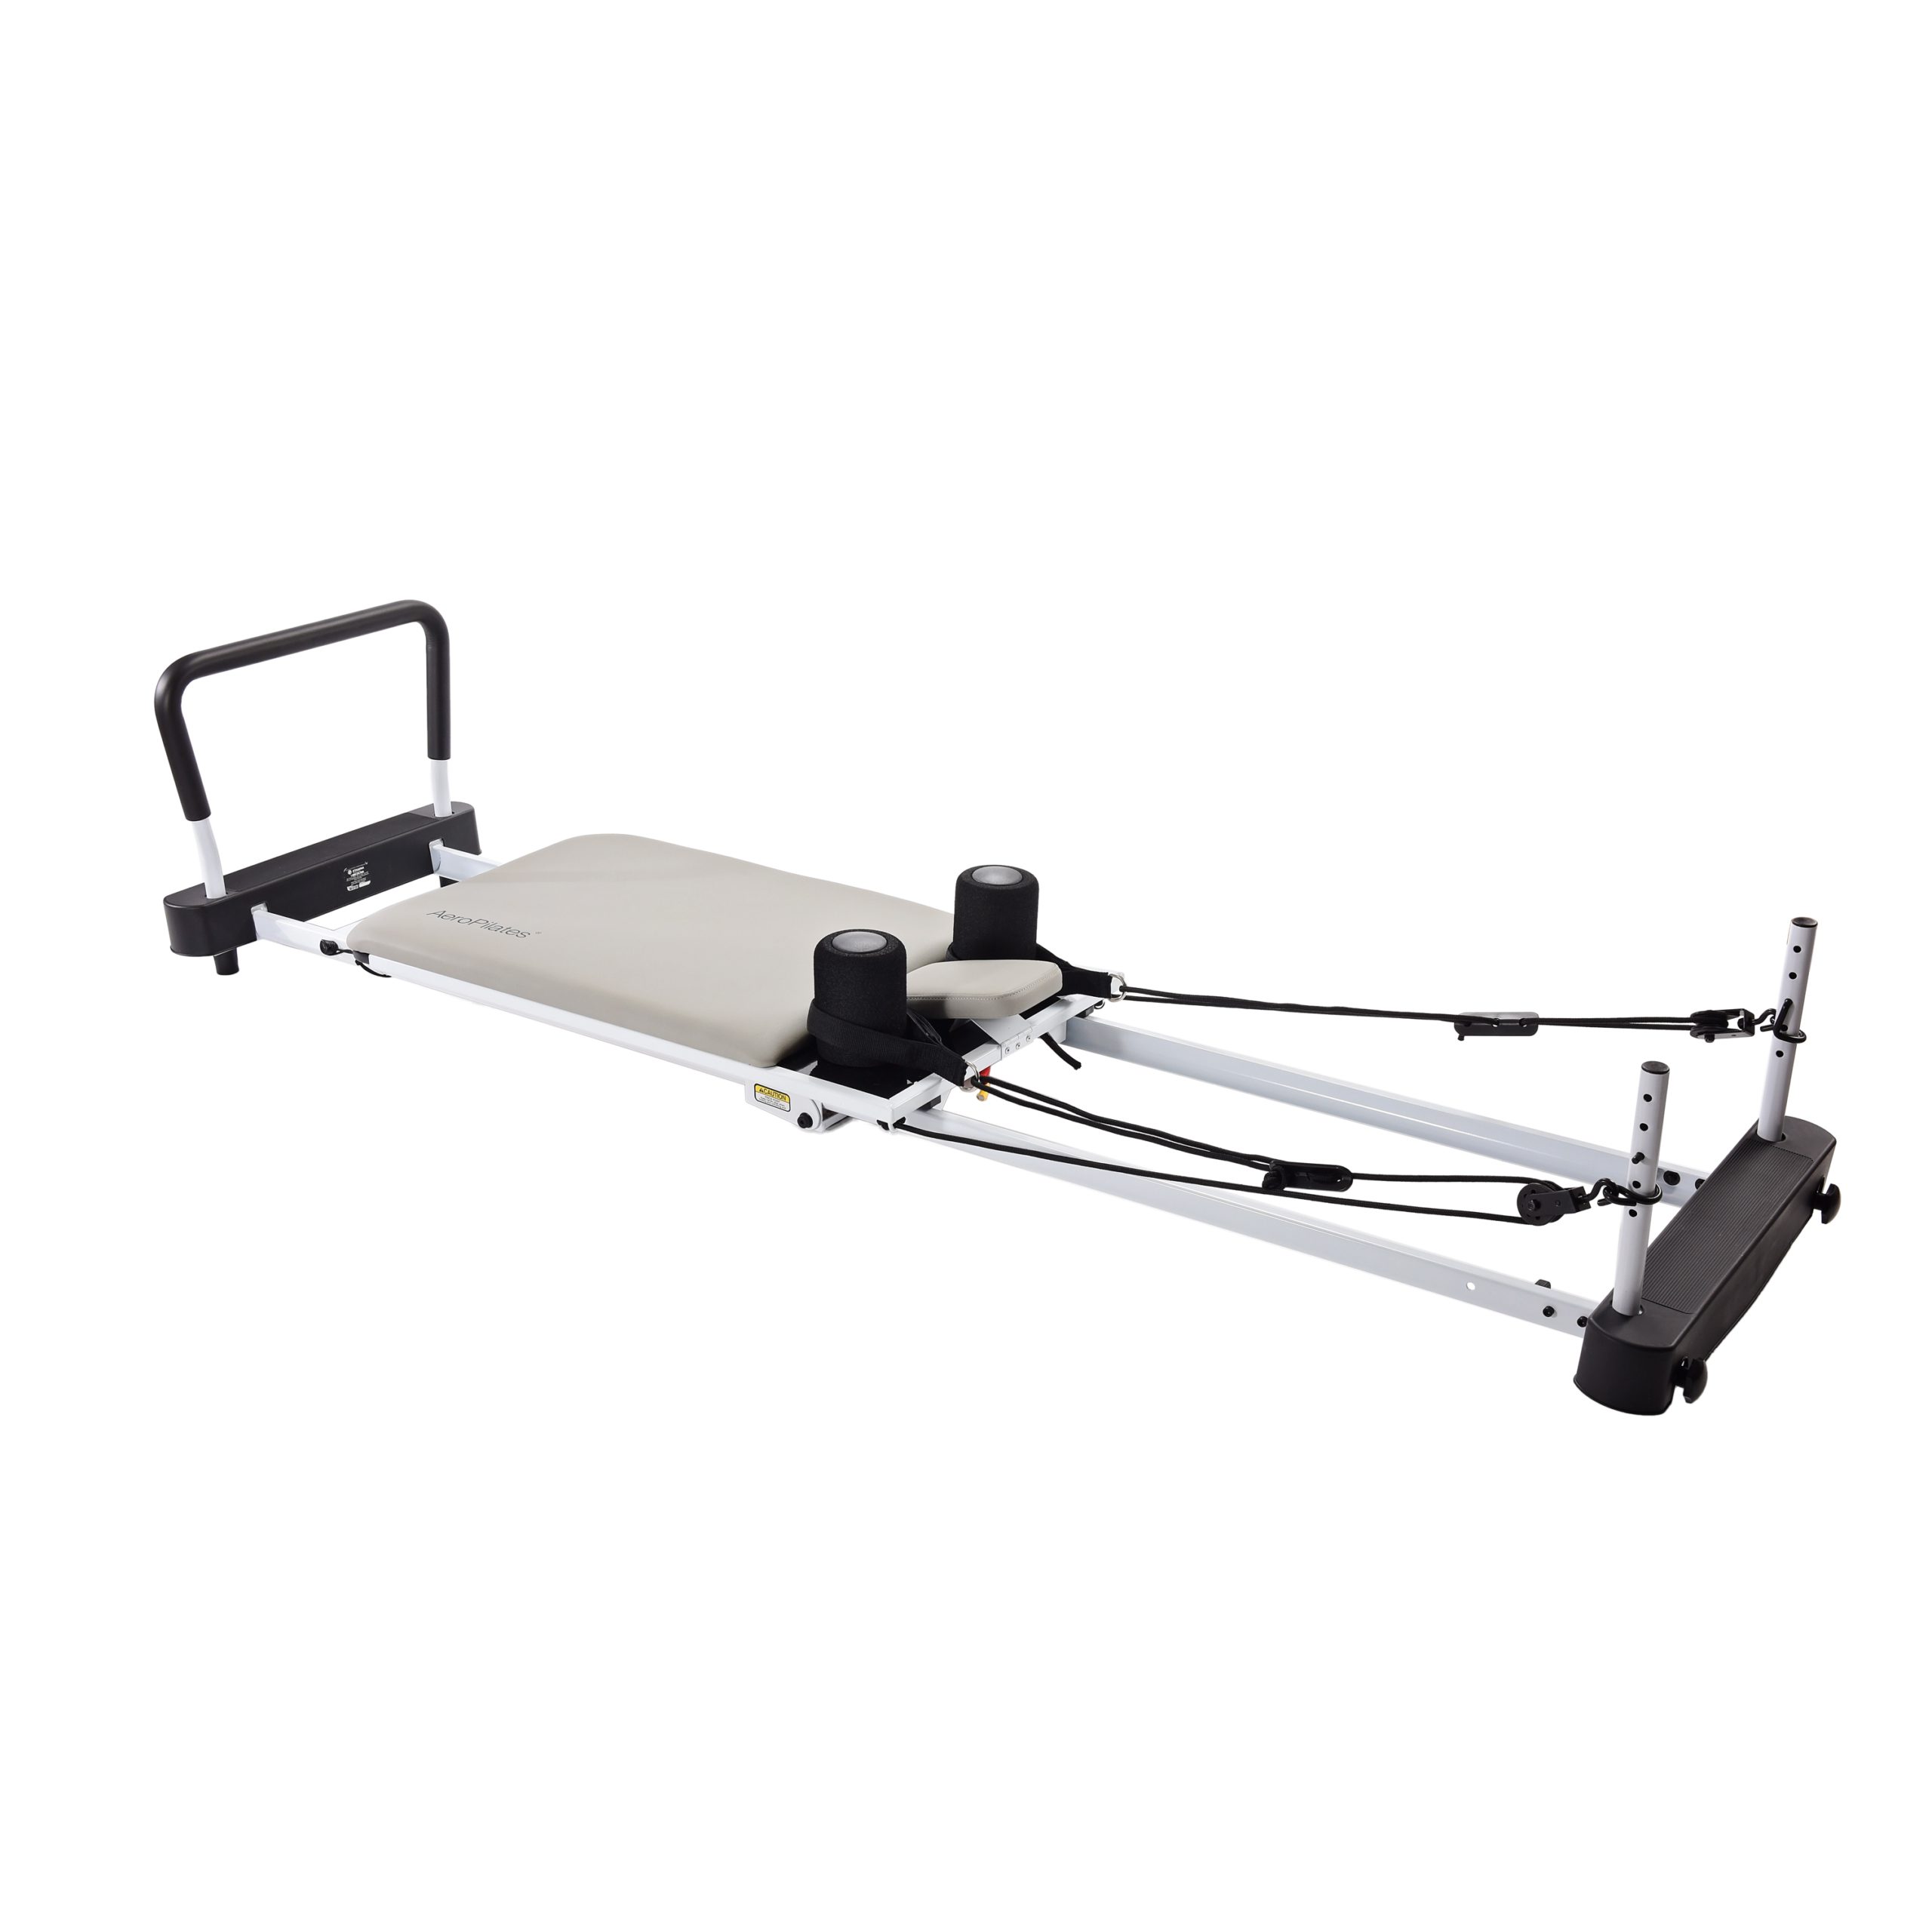 Aeropilates Pilates Machines - Get Best Price from Manufacturers &  Suppliers in India